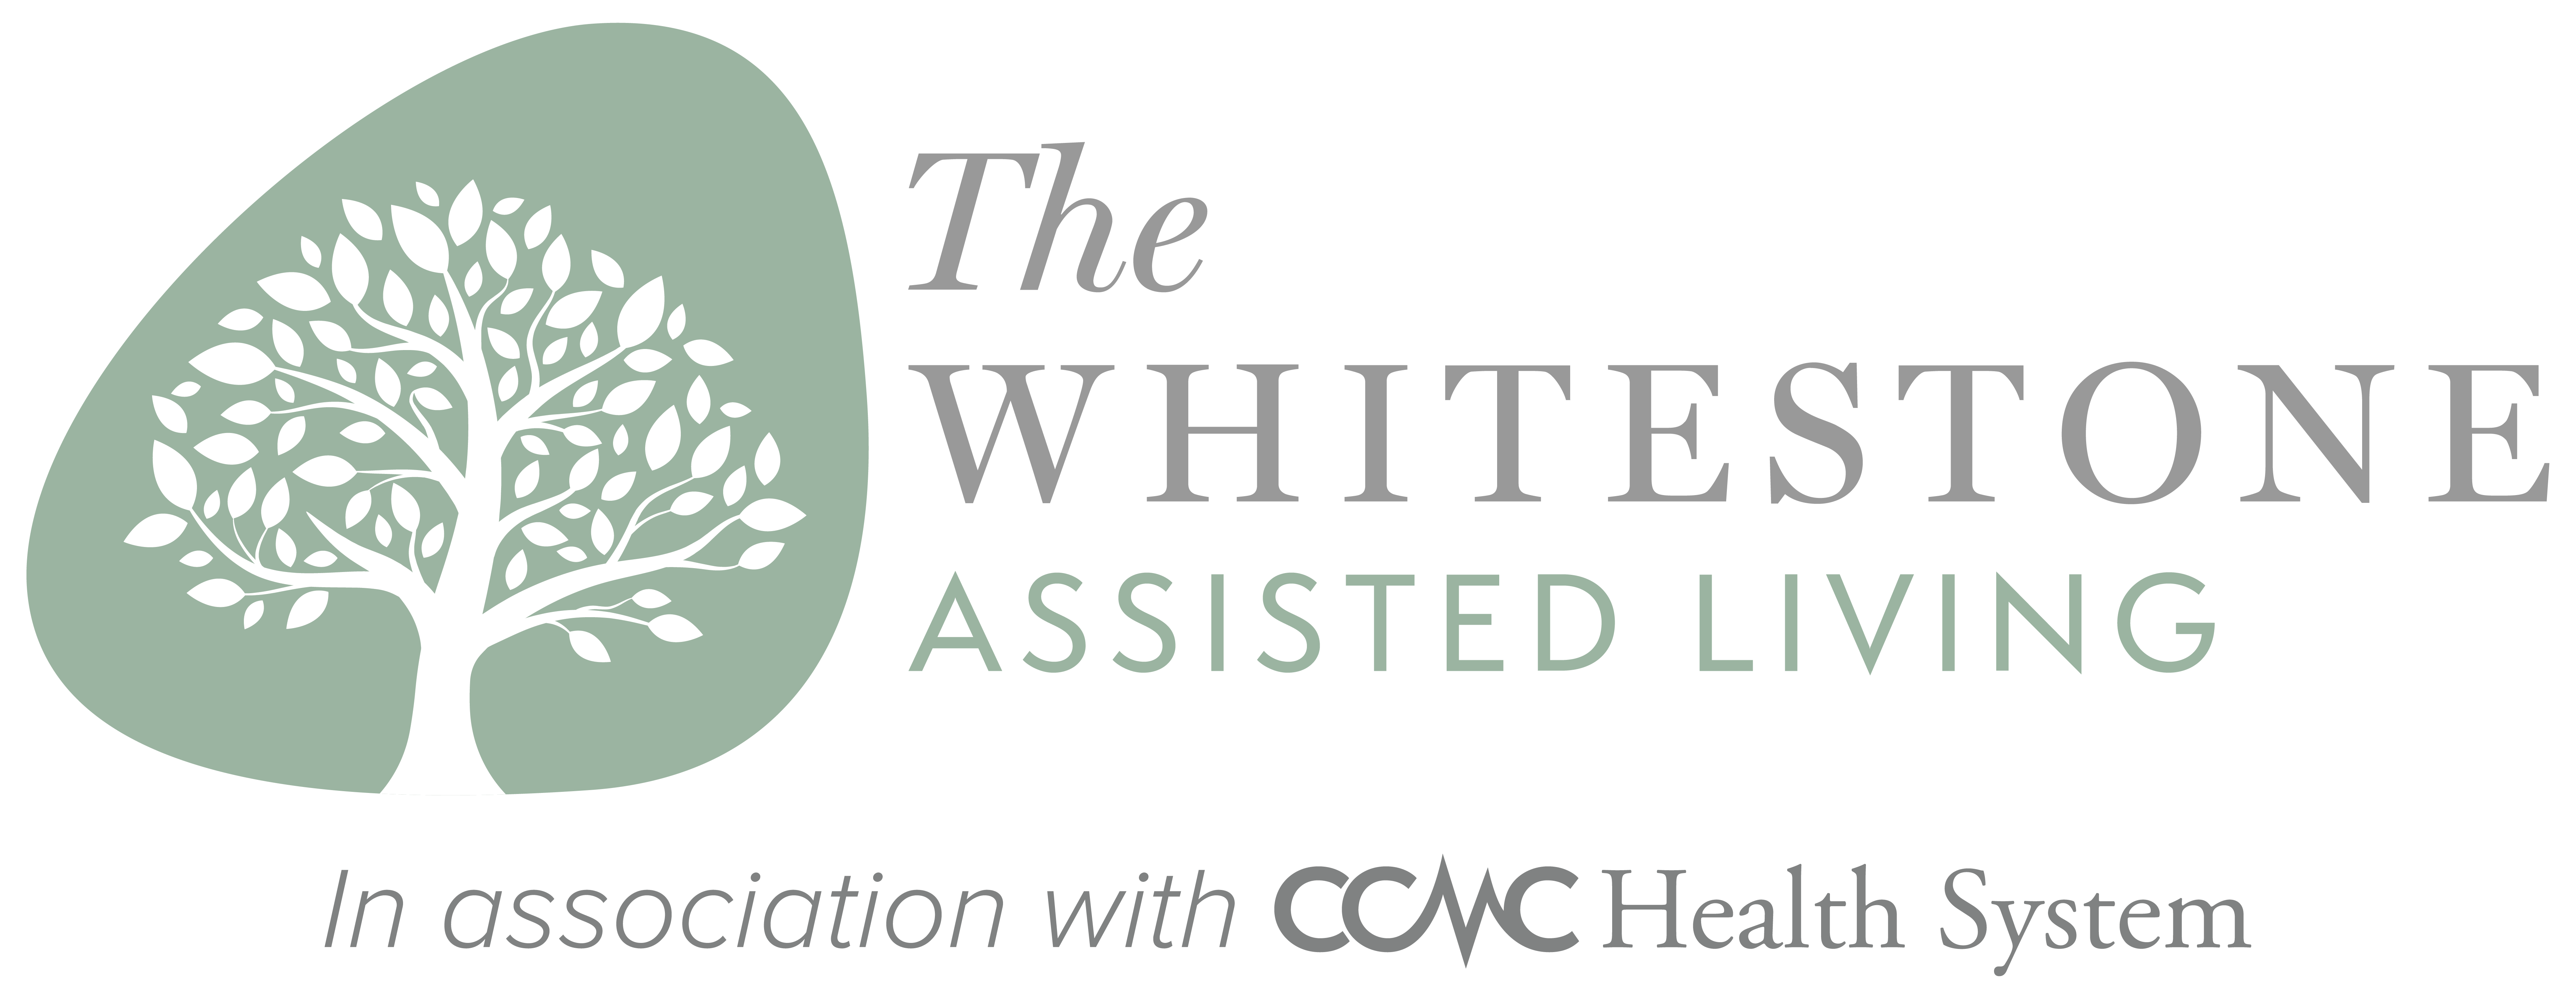 The Whitestone Assisted Living - In association with CCMC Health System Logo